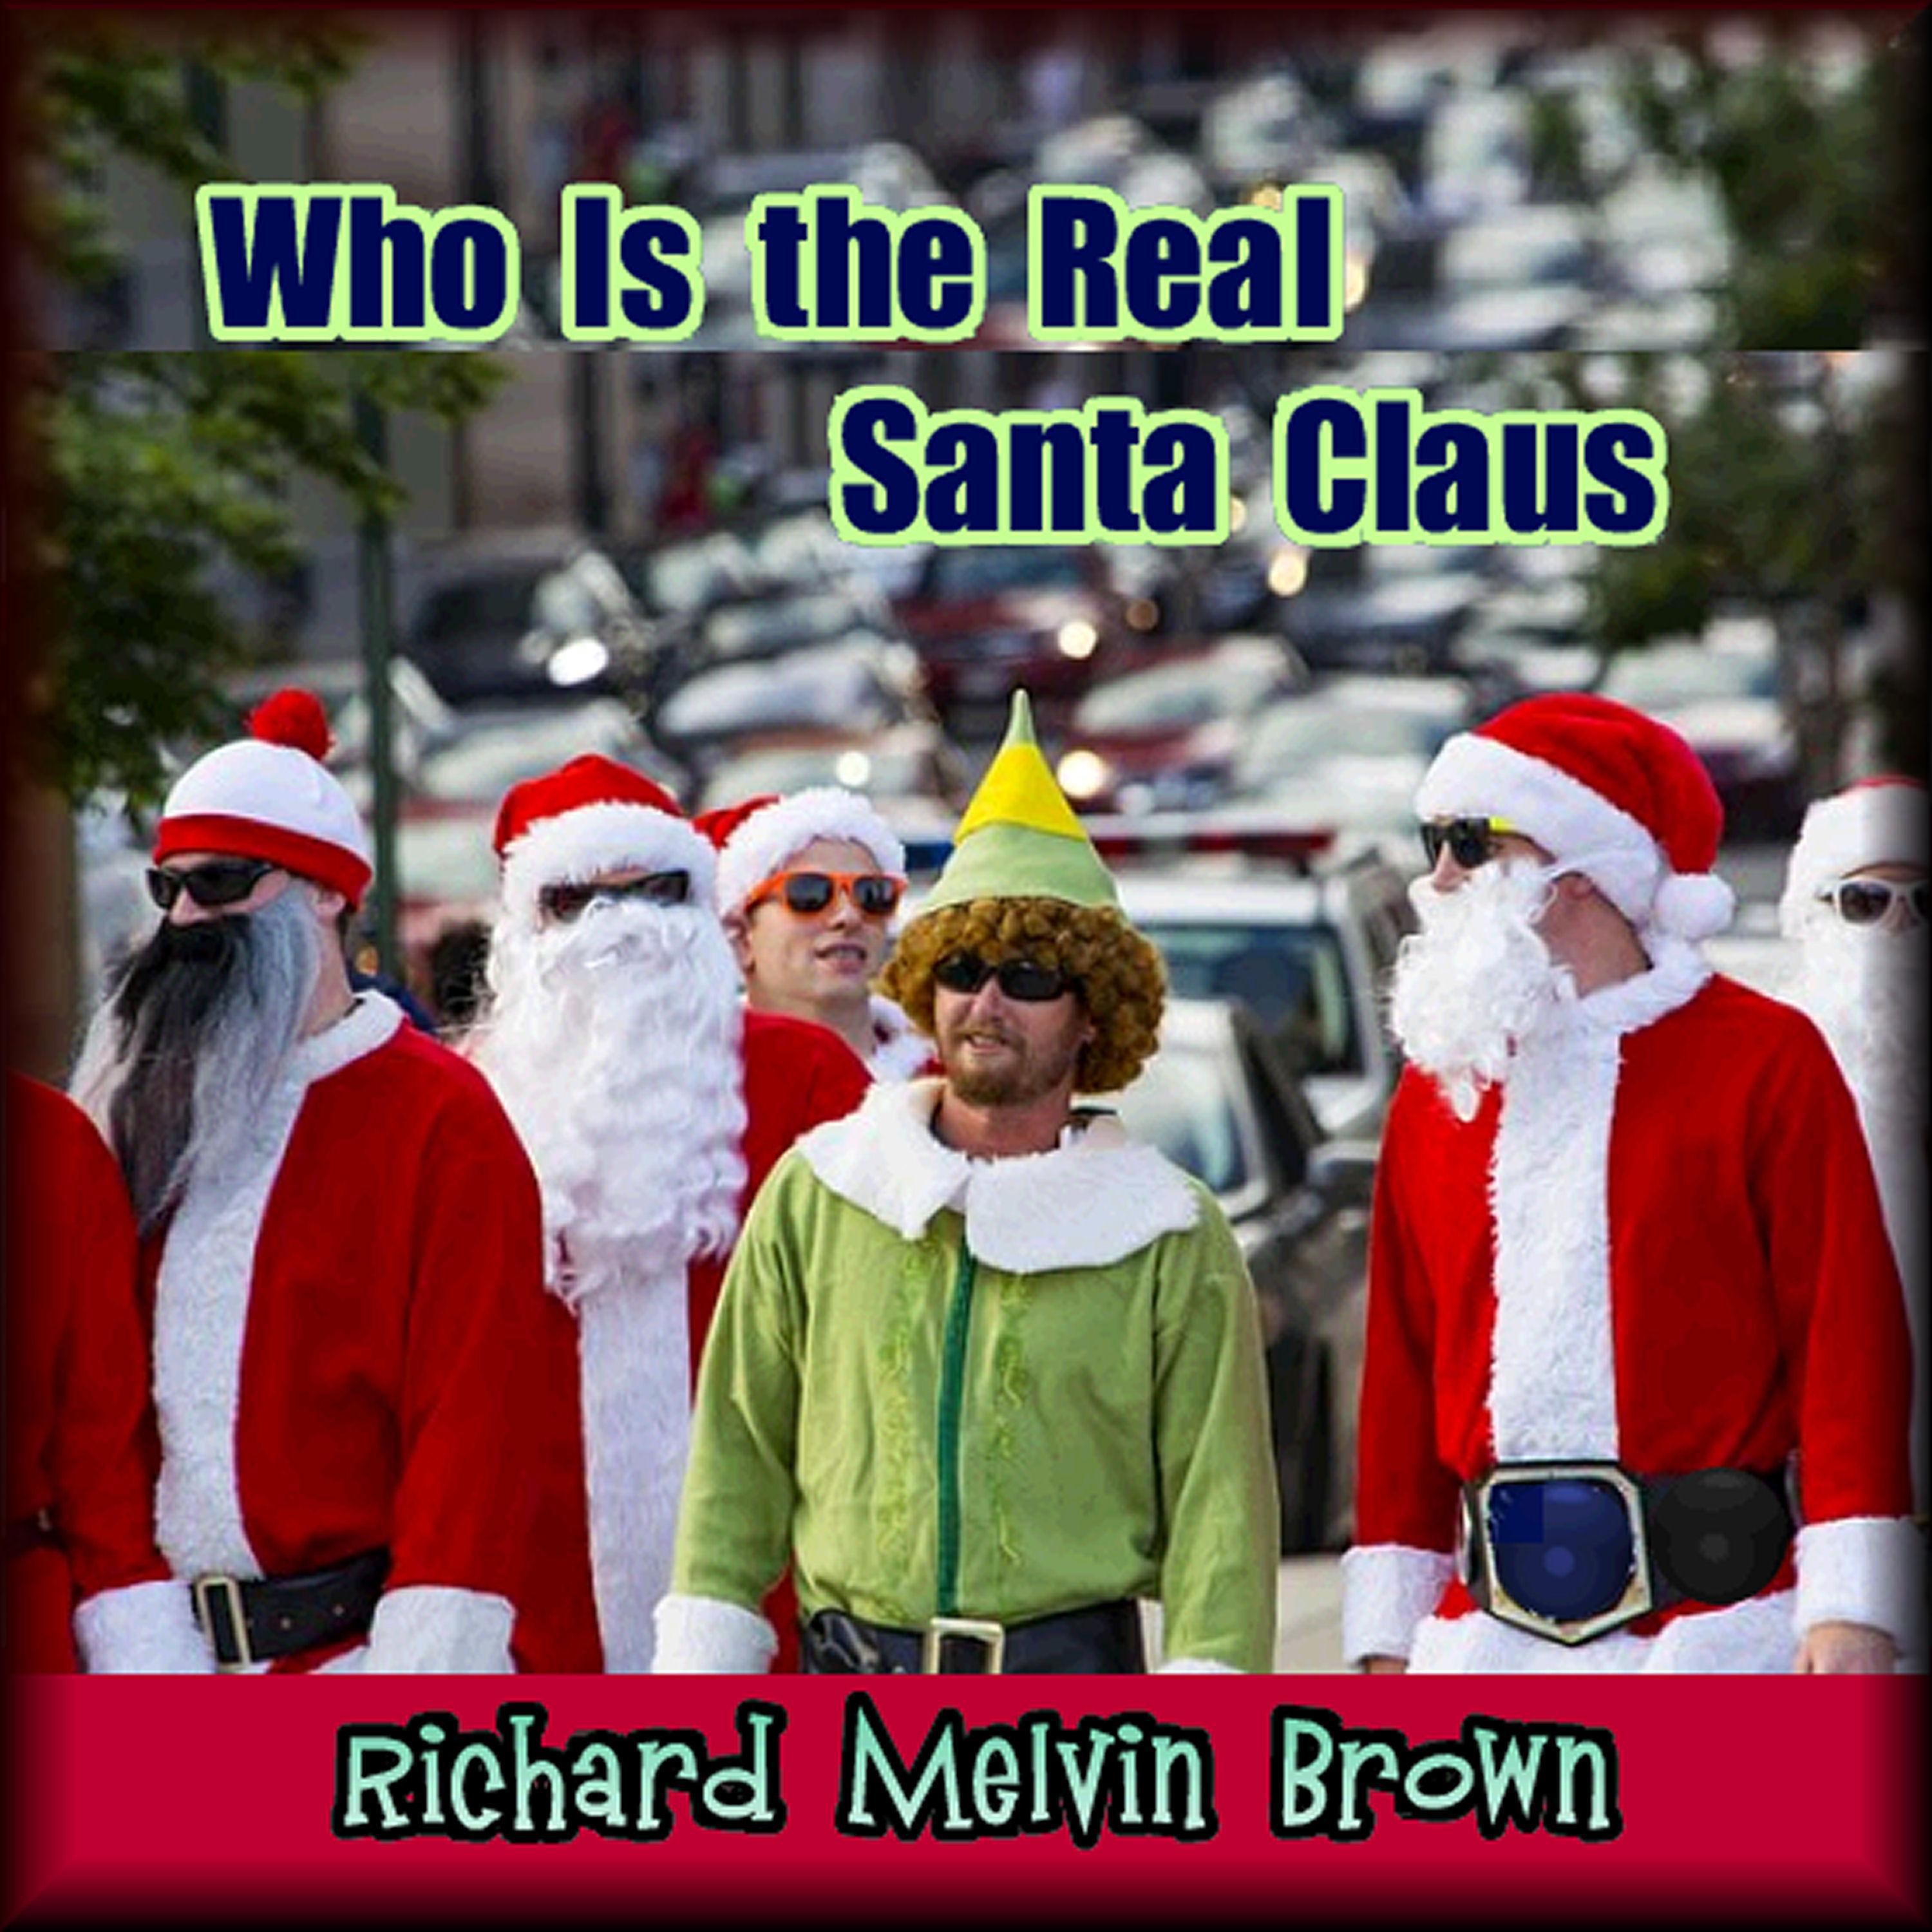 Who Is the Real Santa Claus